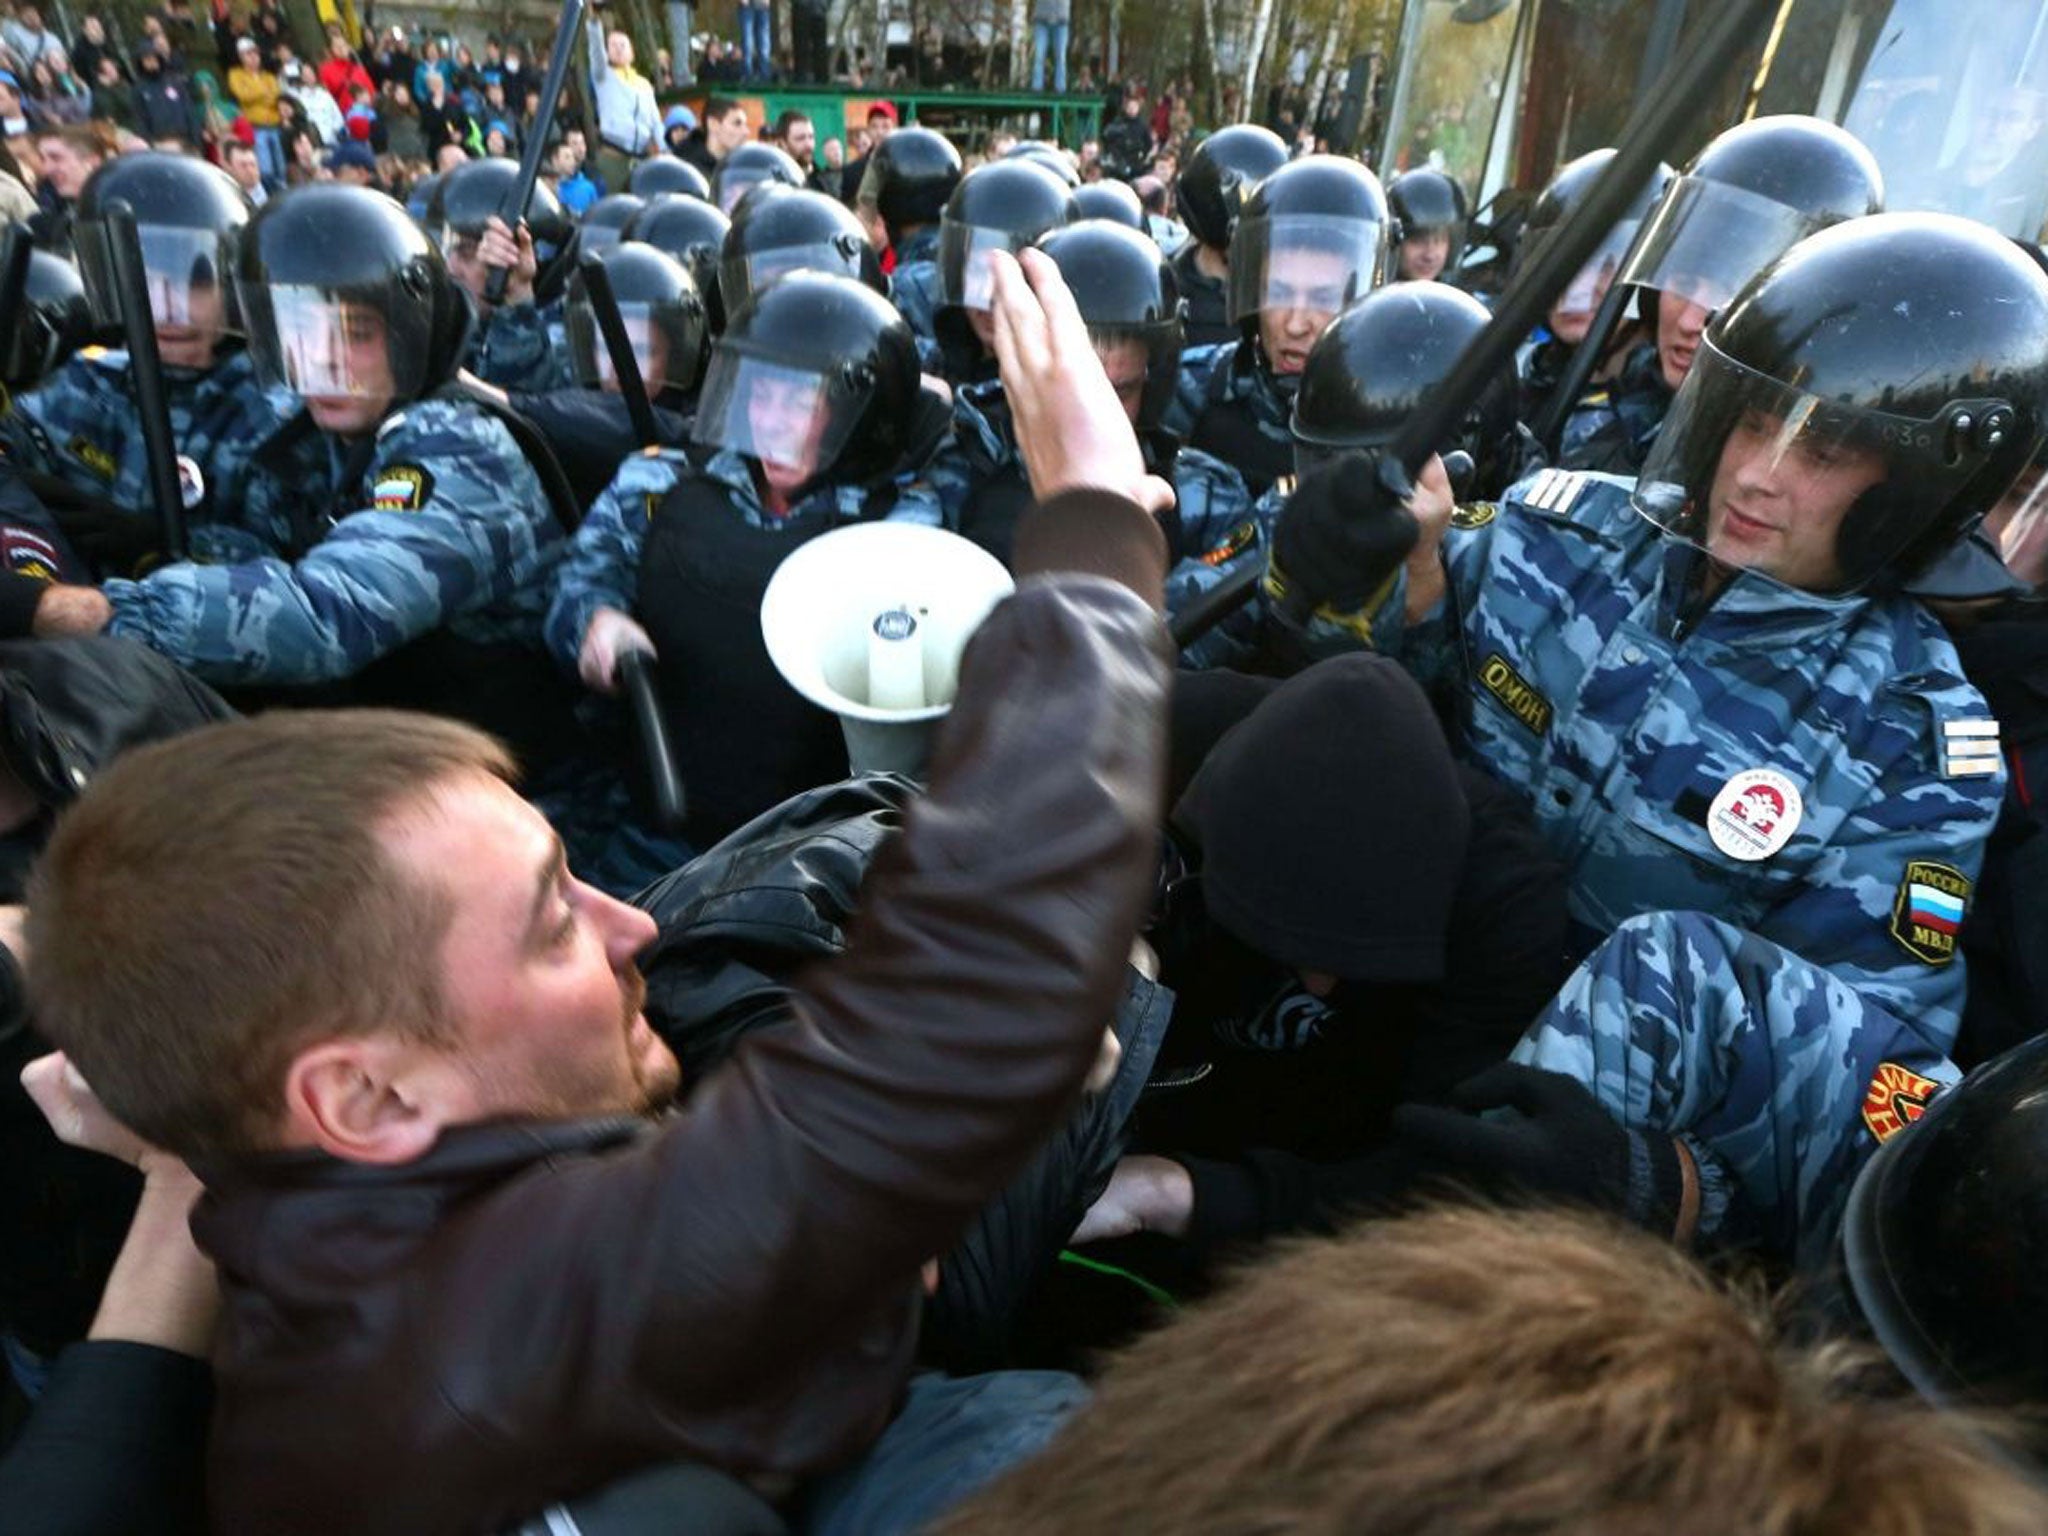 Riot police held back protestors in the southern Biryulyovo of Moscow as violence broke out following the murder of an ethnic Russian, blamed on a migrant from the Caucasus